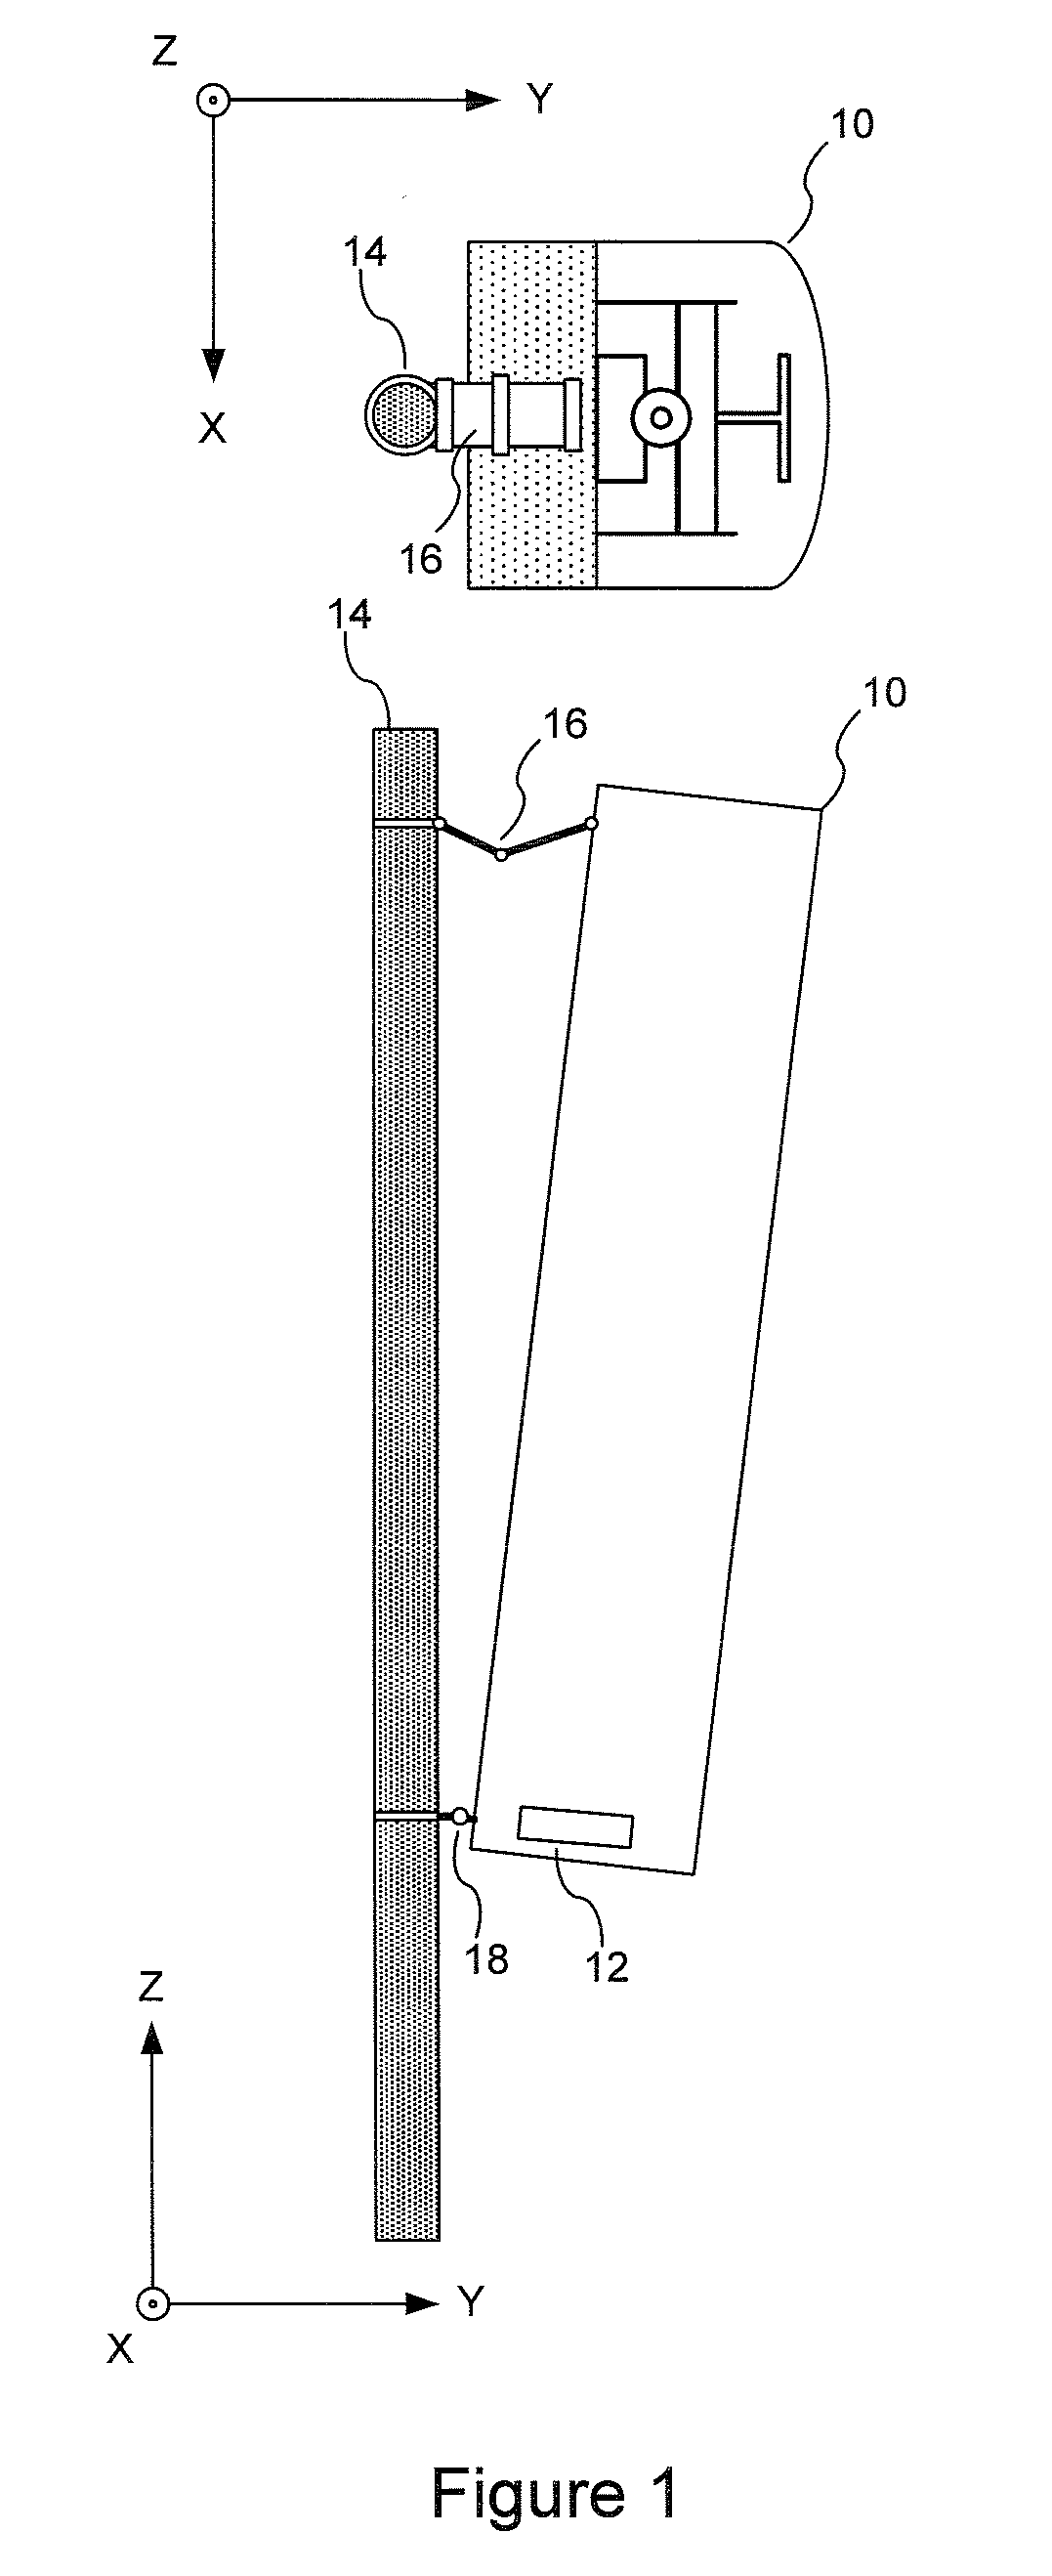 Compound two-way antenna with installation compensator